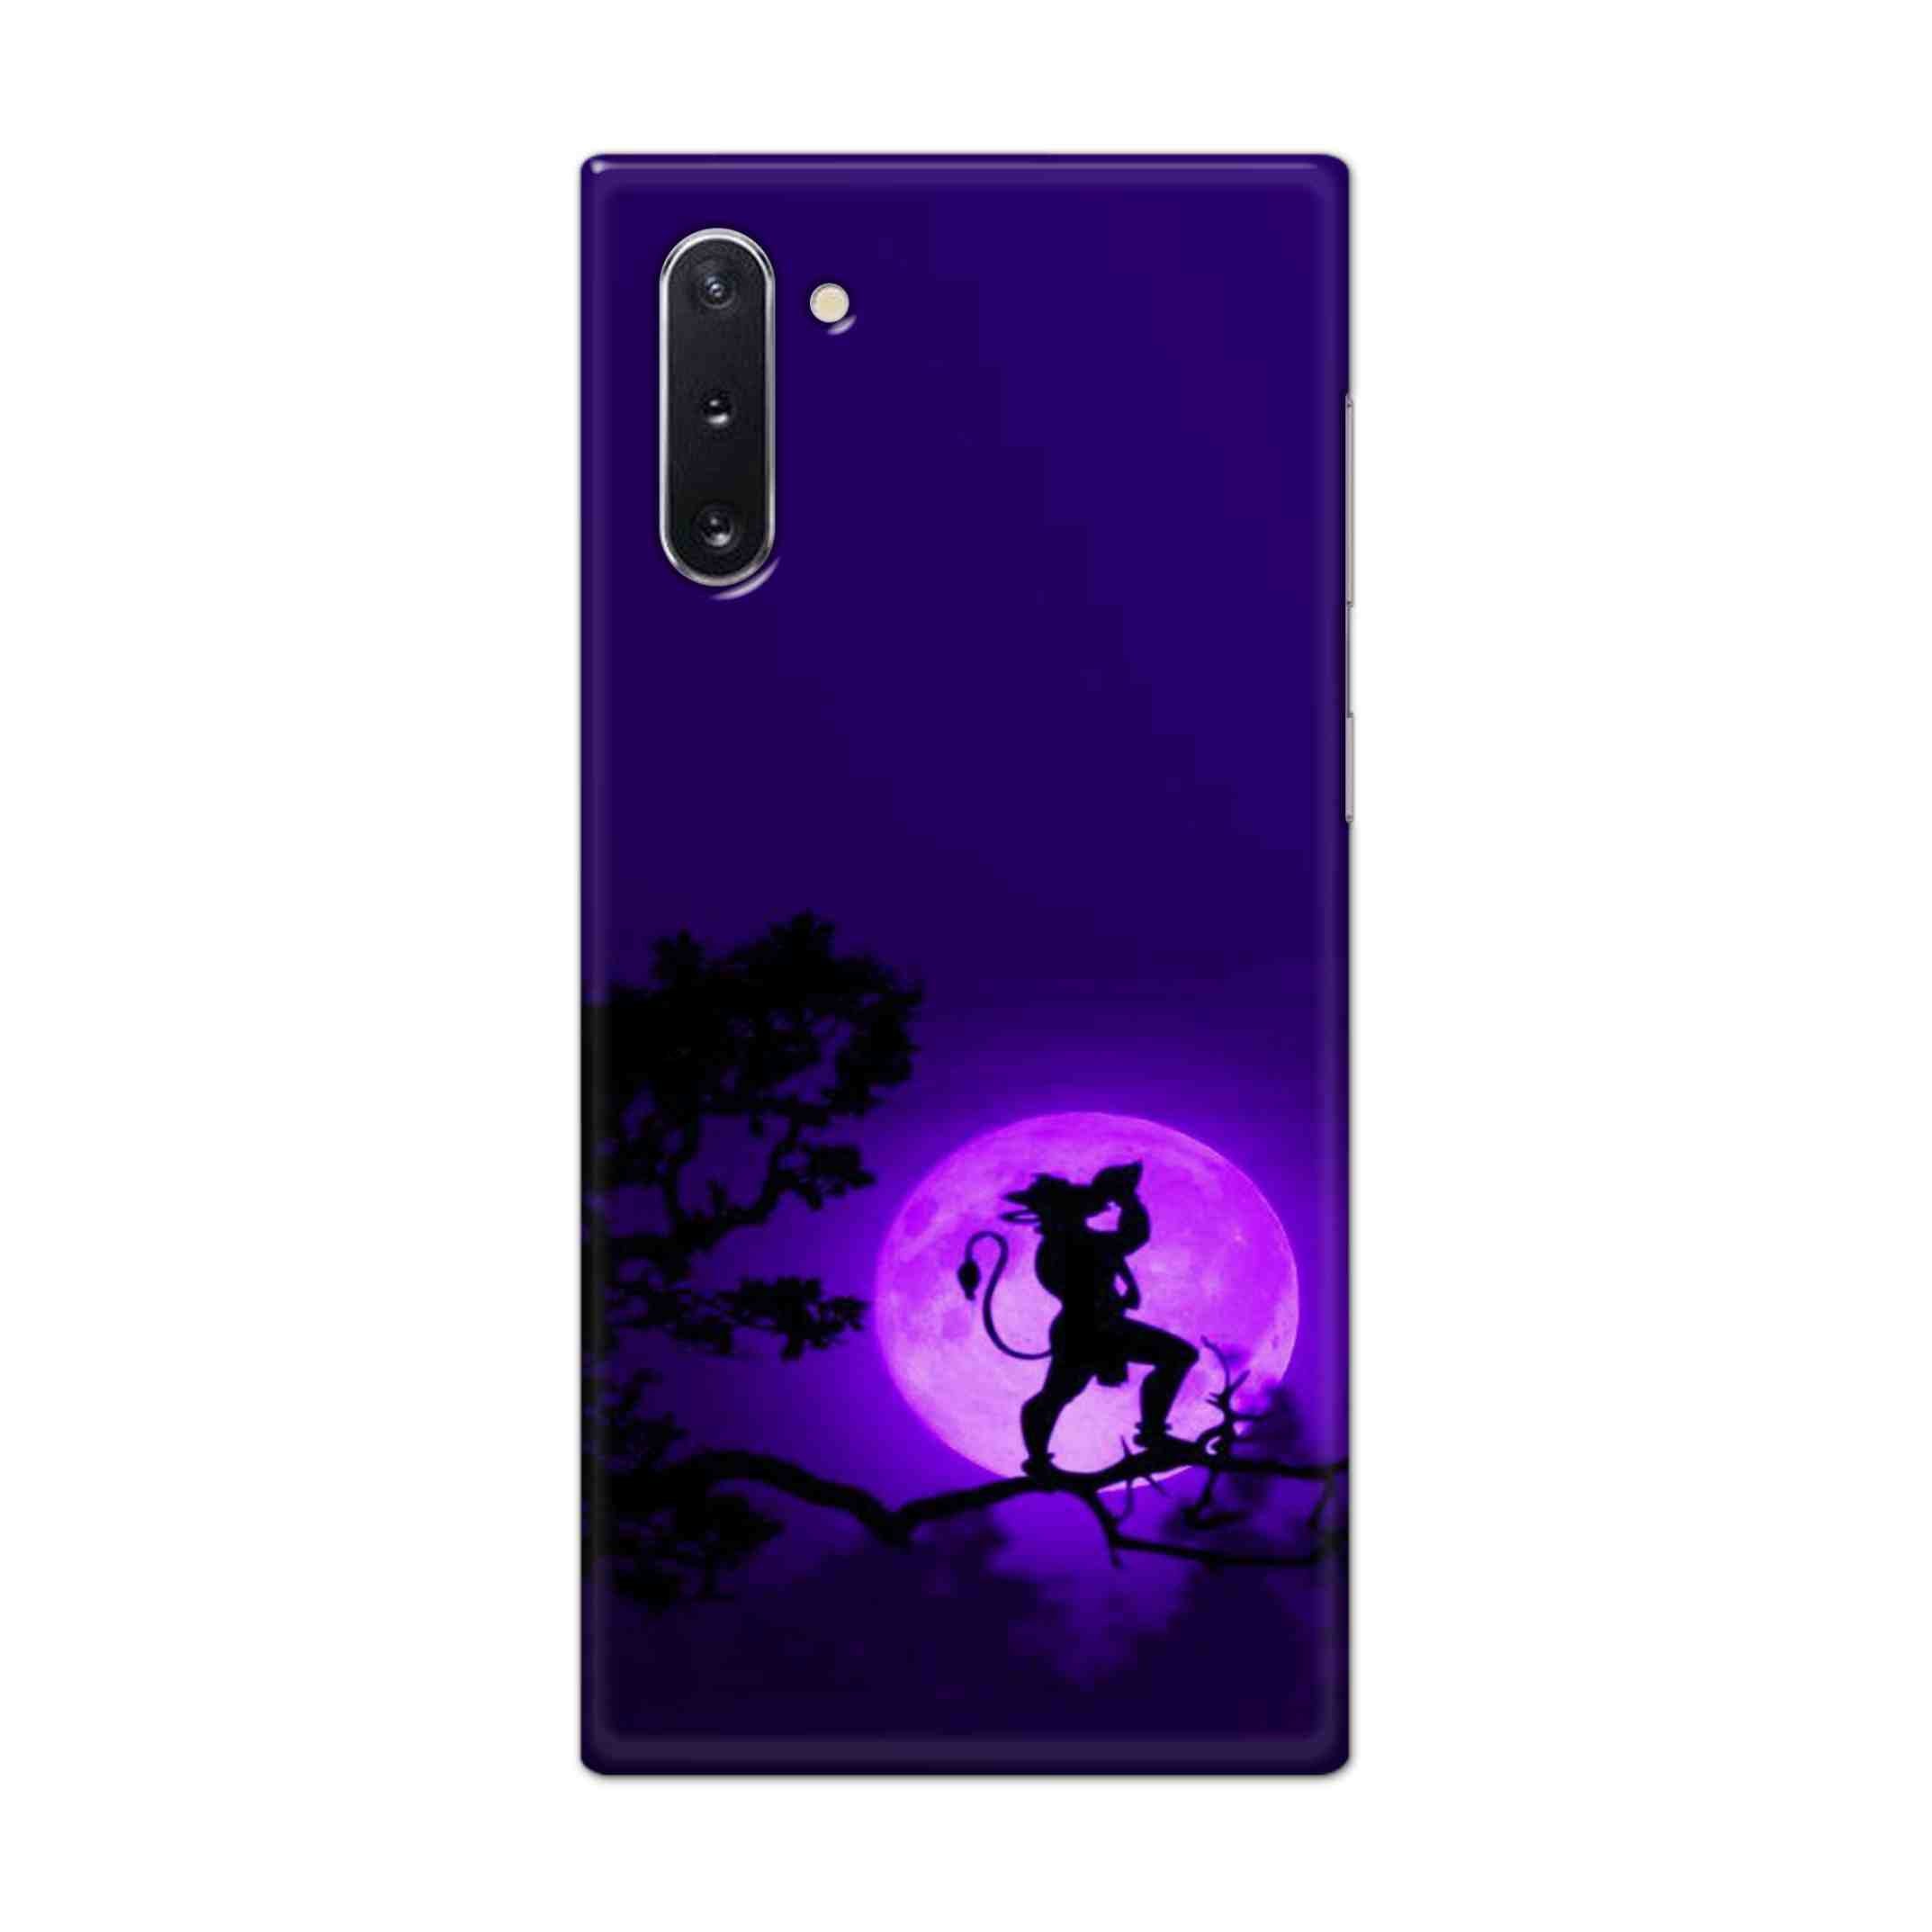 Buy Hanuman Hard Back Mobile Phone Case Cover For Samsung Galaxy Note 10 Online